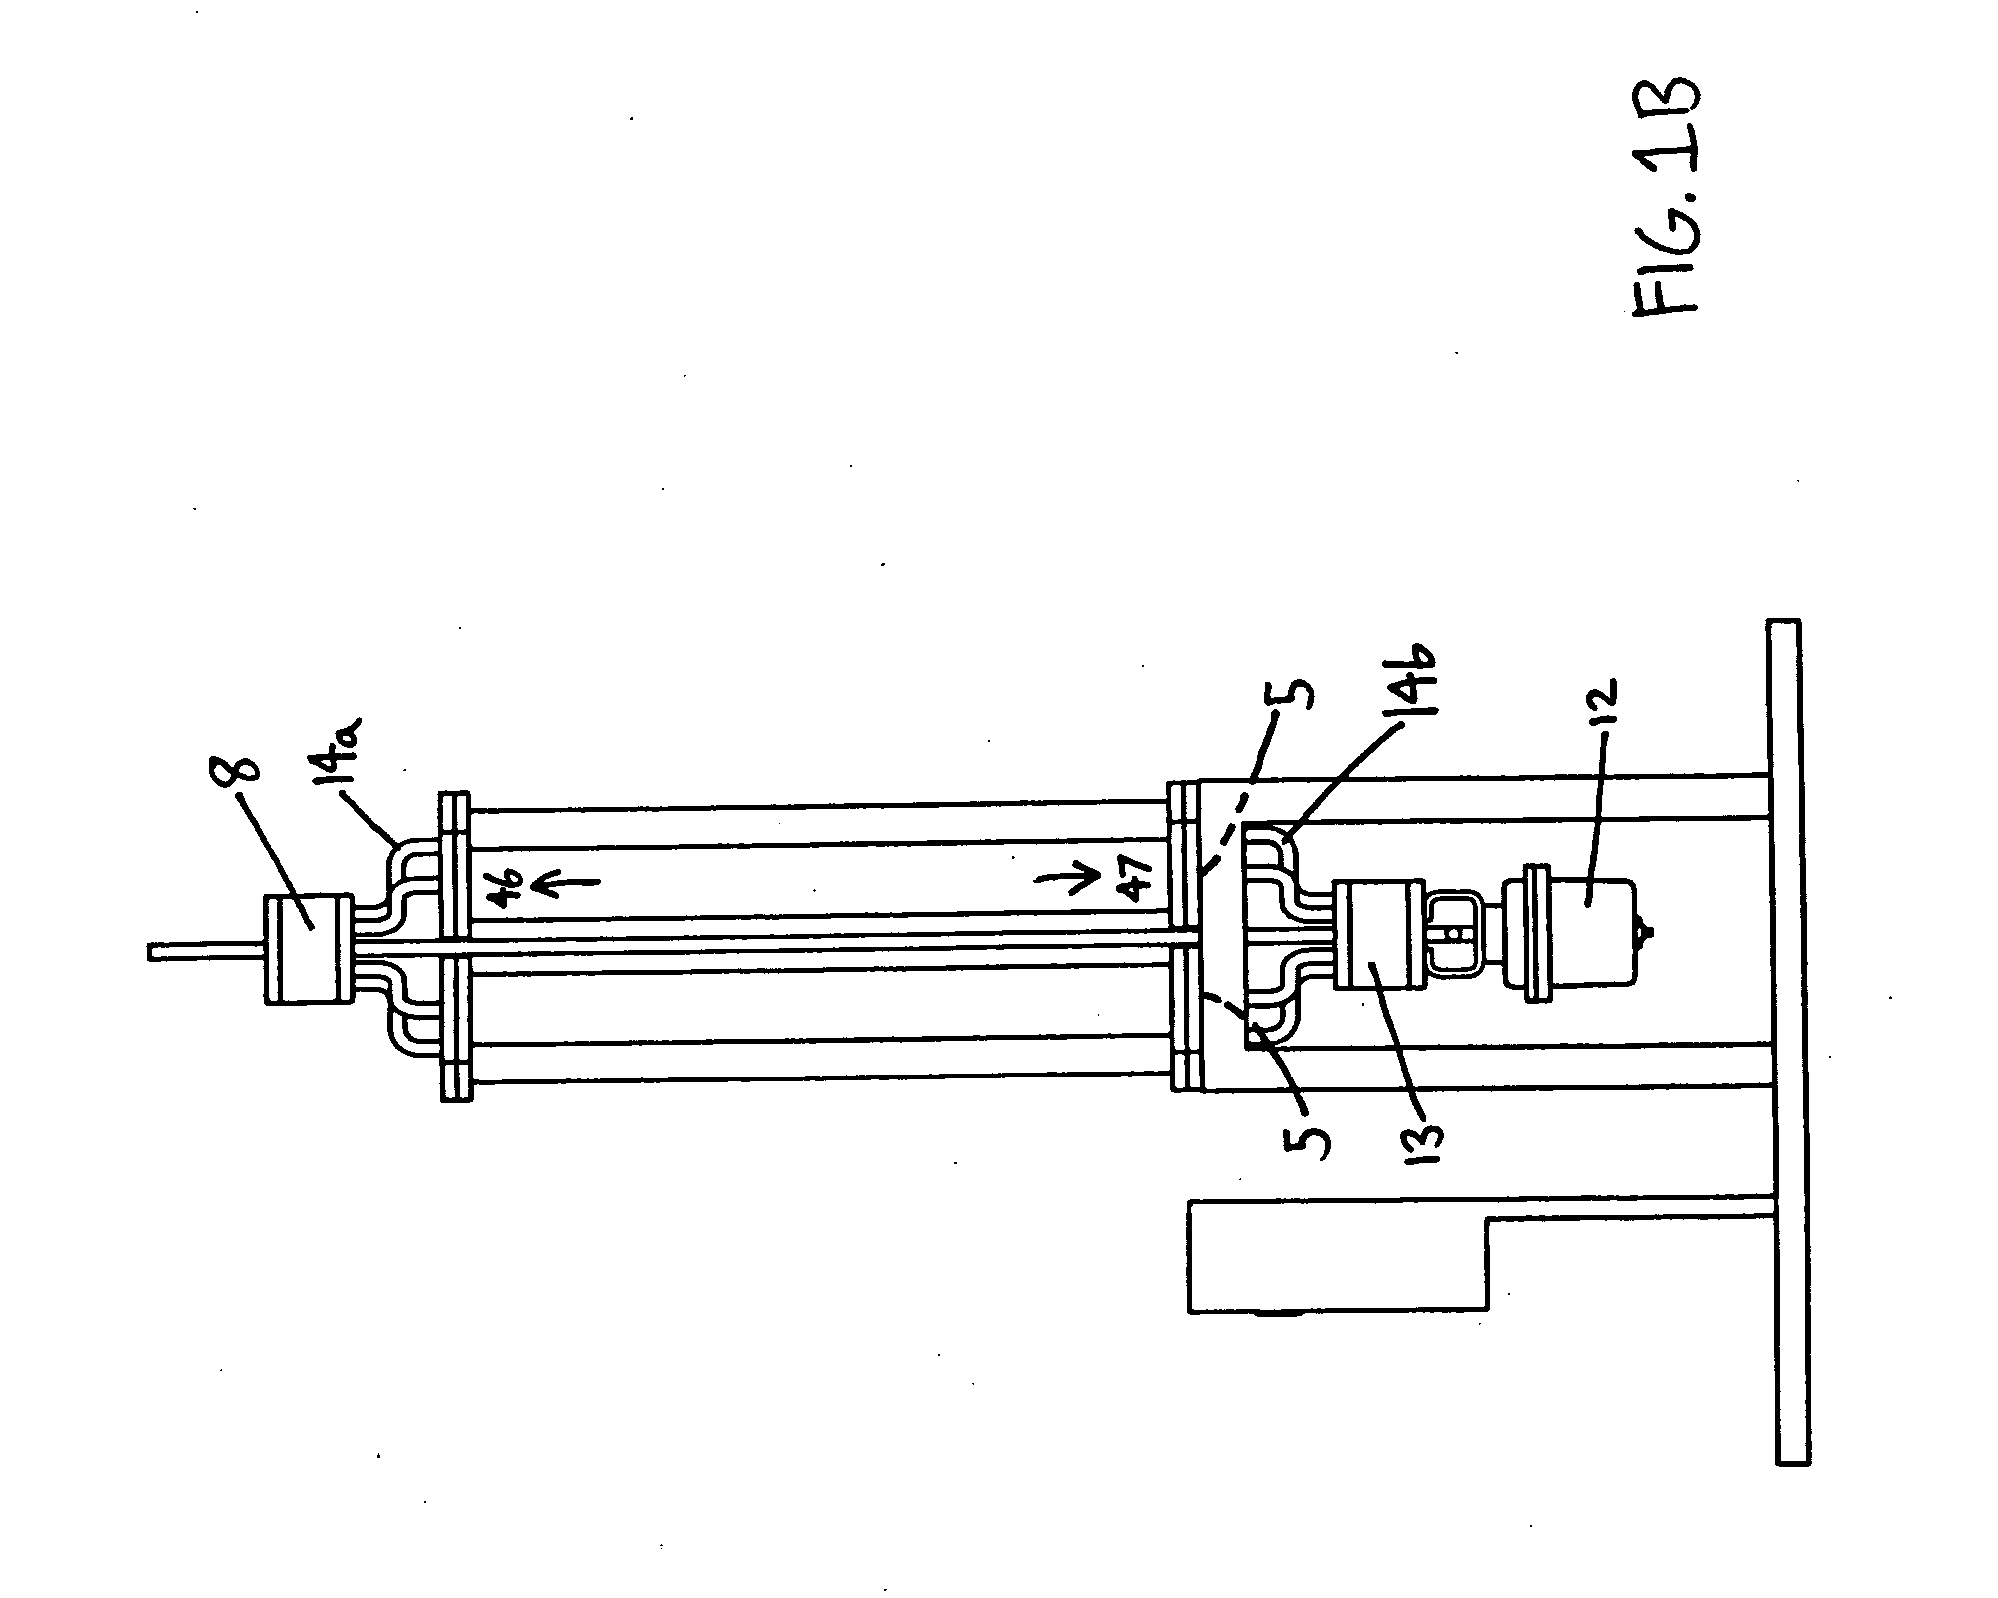 System and method for treating fluid using a multi-port valve assembly